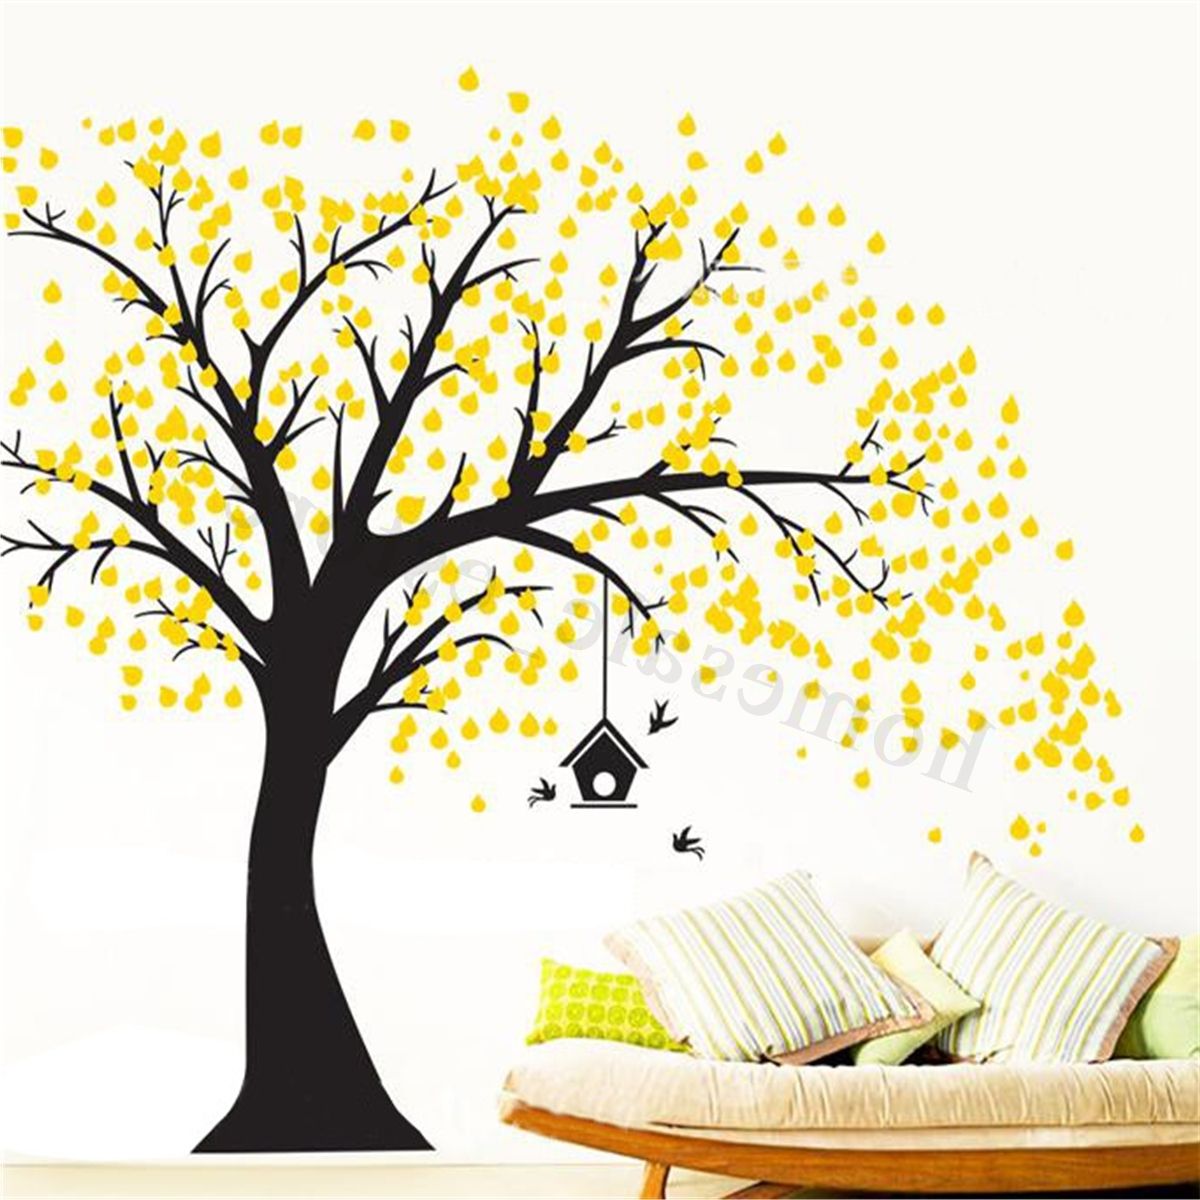 210cmx180cm Diy Tree Wall Paper Art Wall Sticker Home Bedroom Bbay With Most Recent Wall Tree Art (View 11 of 20)